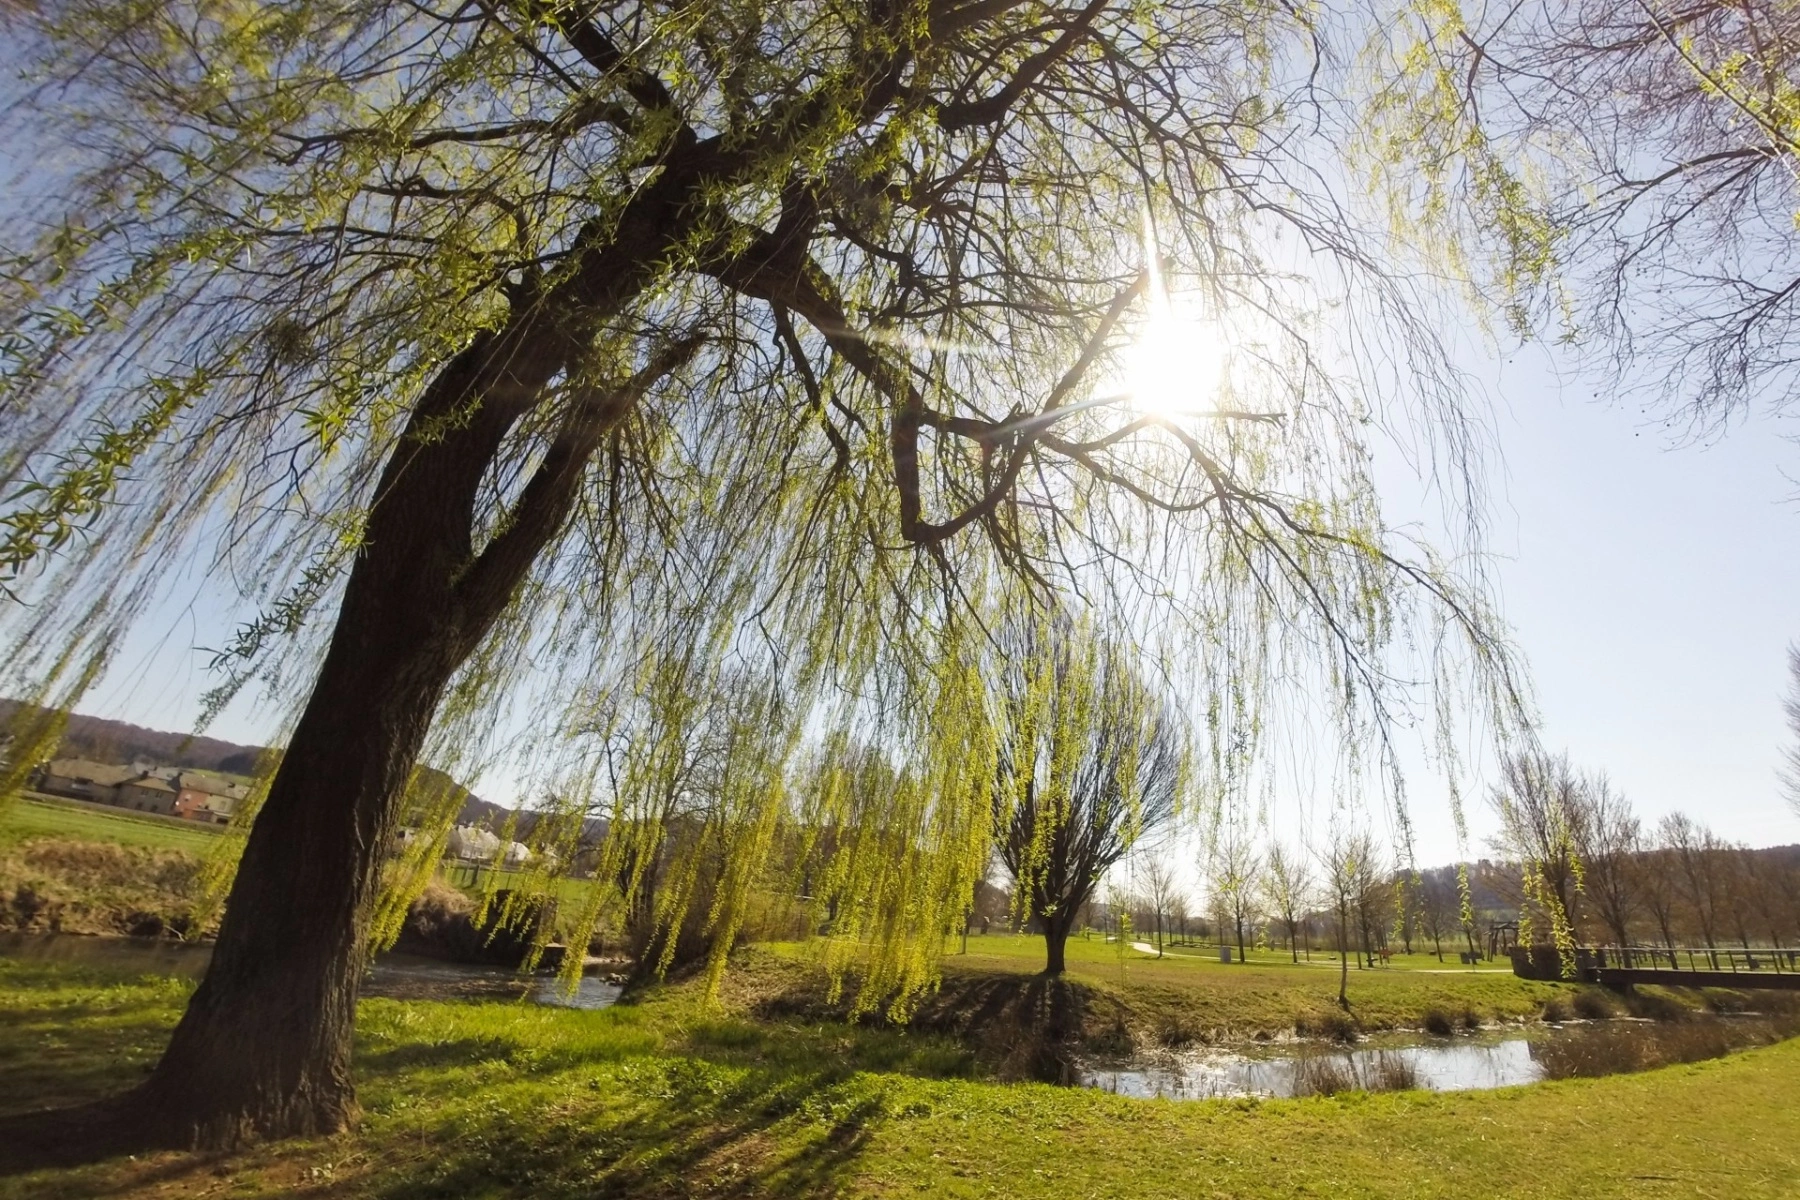 a towering willow tree in the lush geen parc communal in Mersch